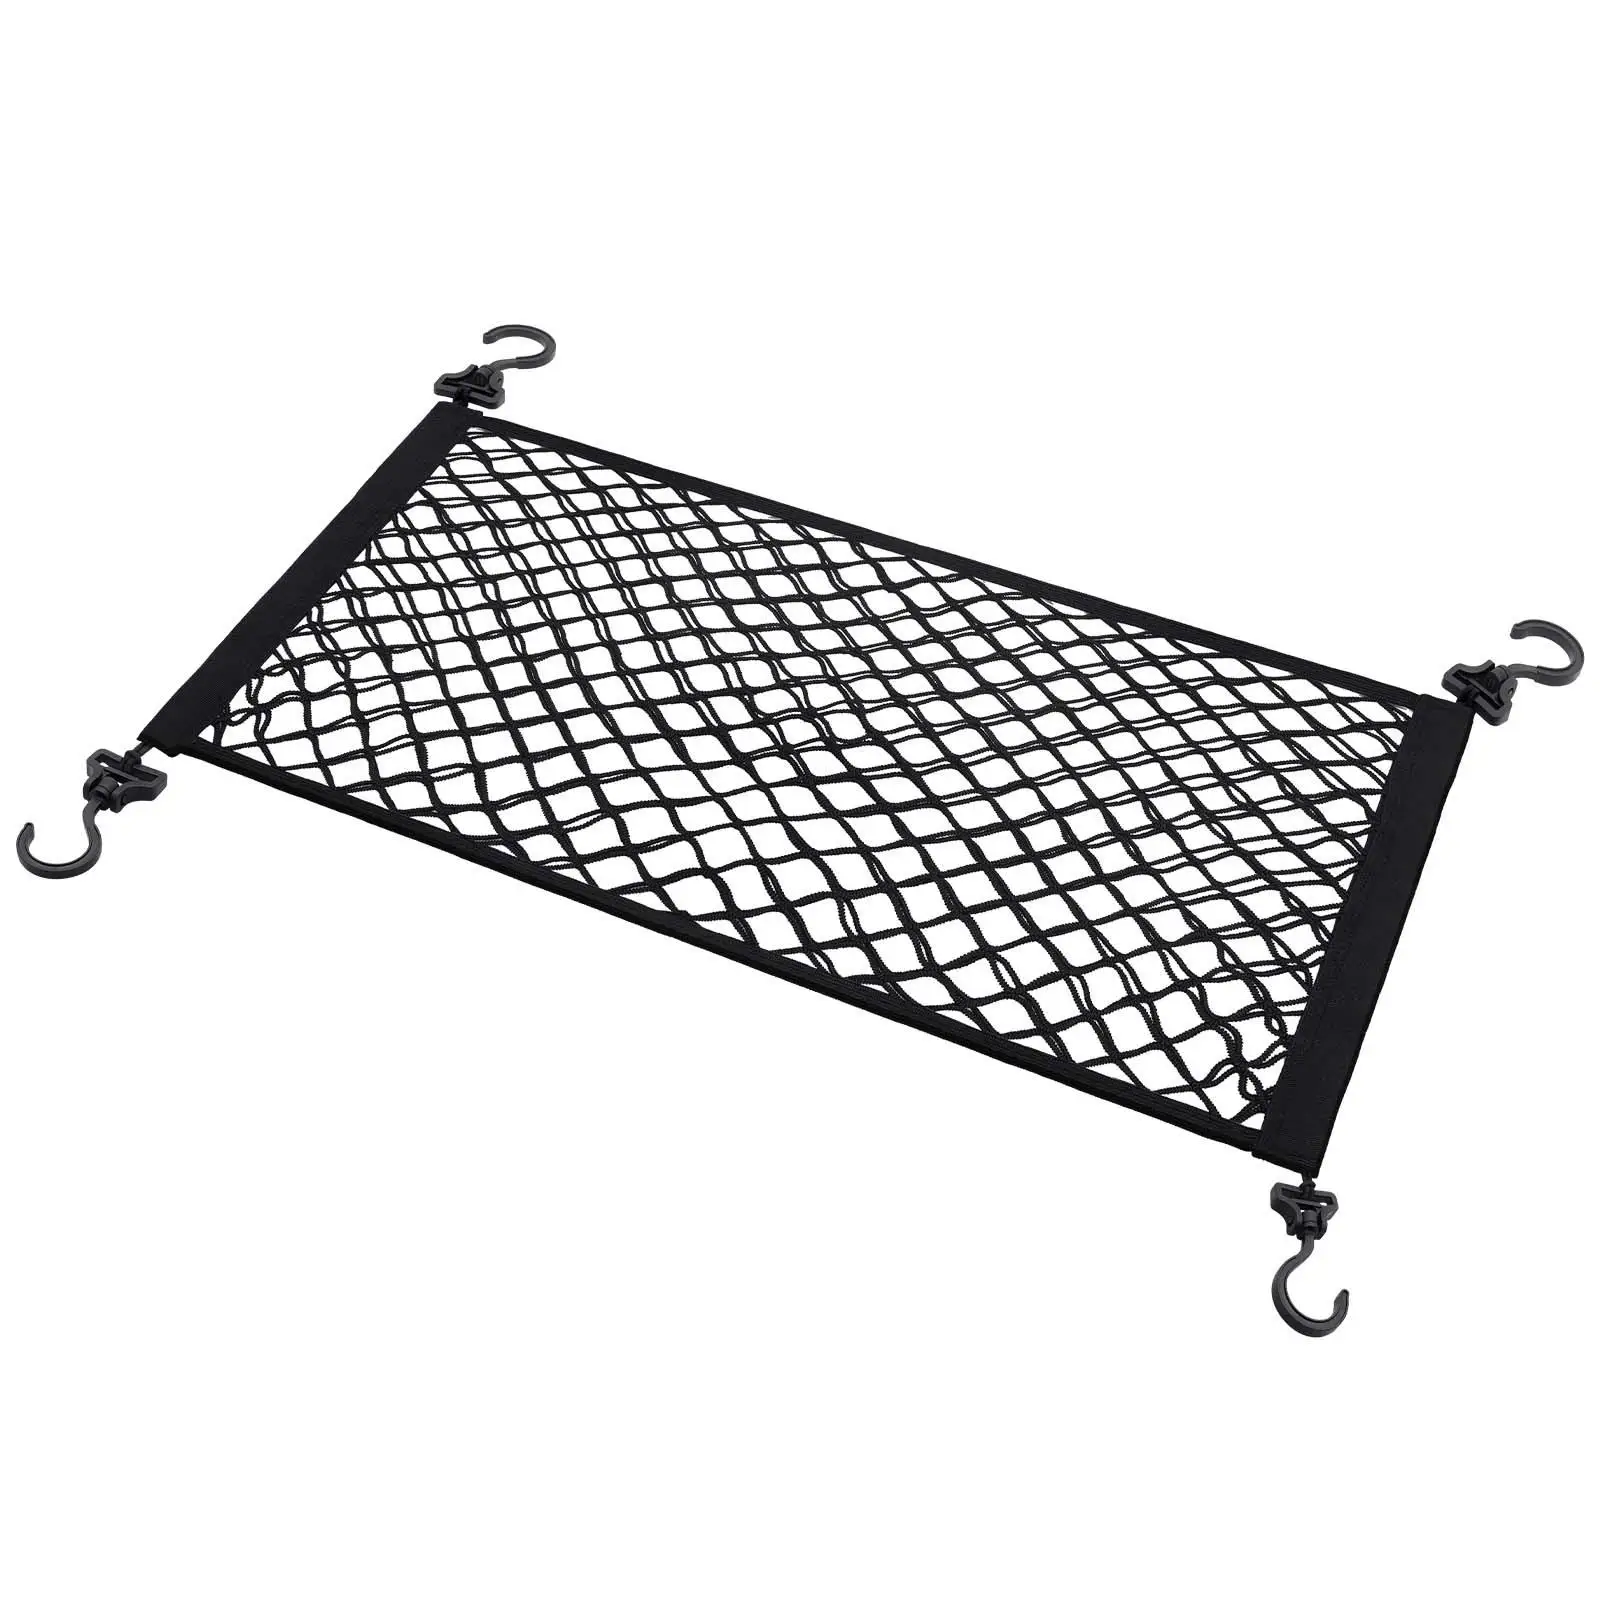 Camping Cargo Net Travel Picnic Car Ceiling Cargo Net Pocket Storage Mesh Pouch for Garden Carts Pickup Truck Bed Trailer Boats